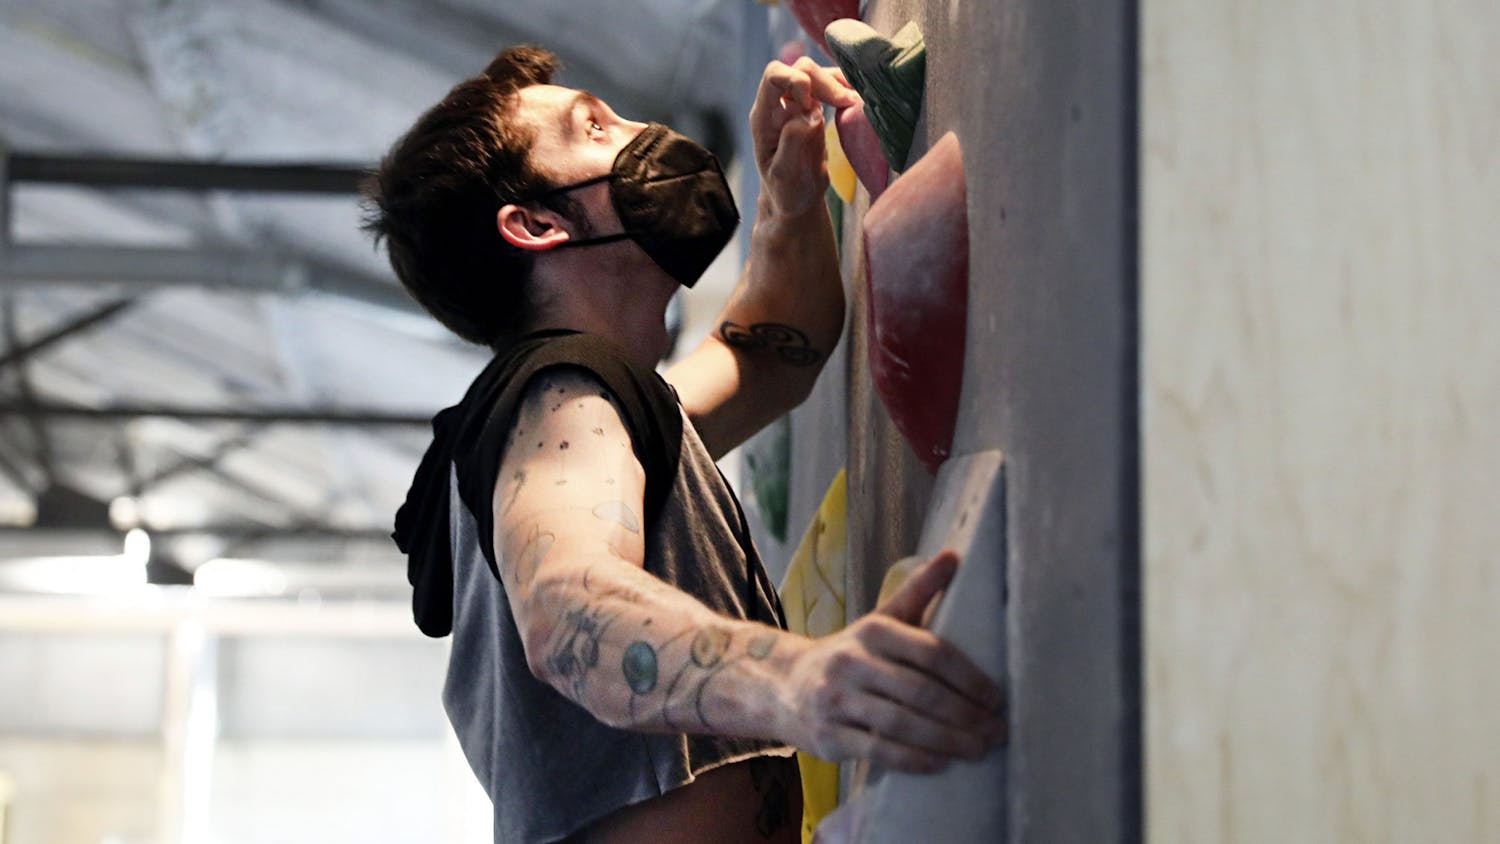 Jeremy Mall, 25, a culinary teacher at East Side high school, practices rock climbing in a homemade crop top at The Knot Climbing Gym on Tuesday, June 1, 2021. Mall is an avid "Crop Top Tuesday" participant, and he said climbing in crop tops is fun and freeing. 